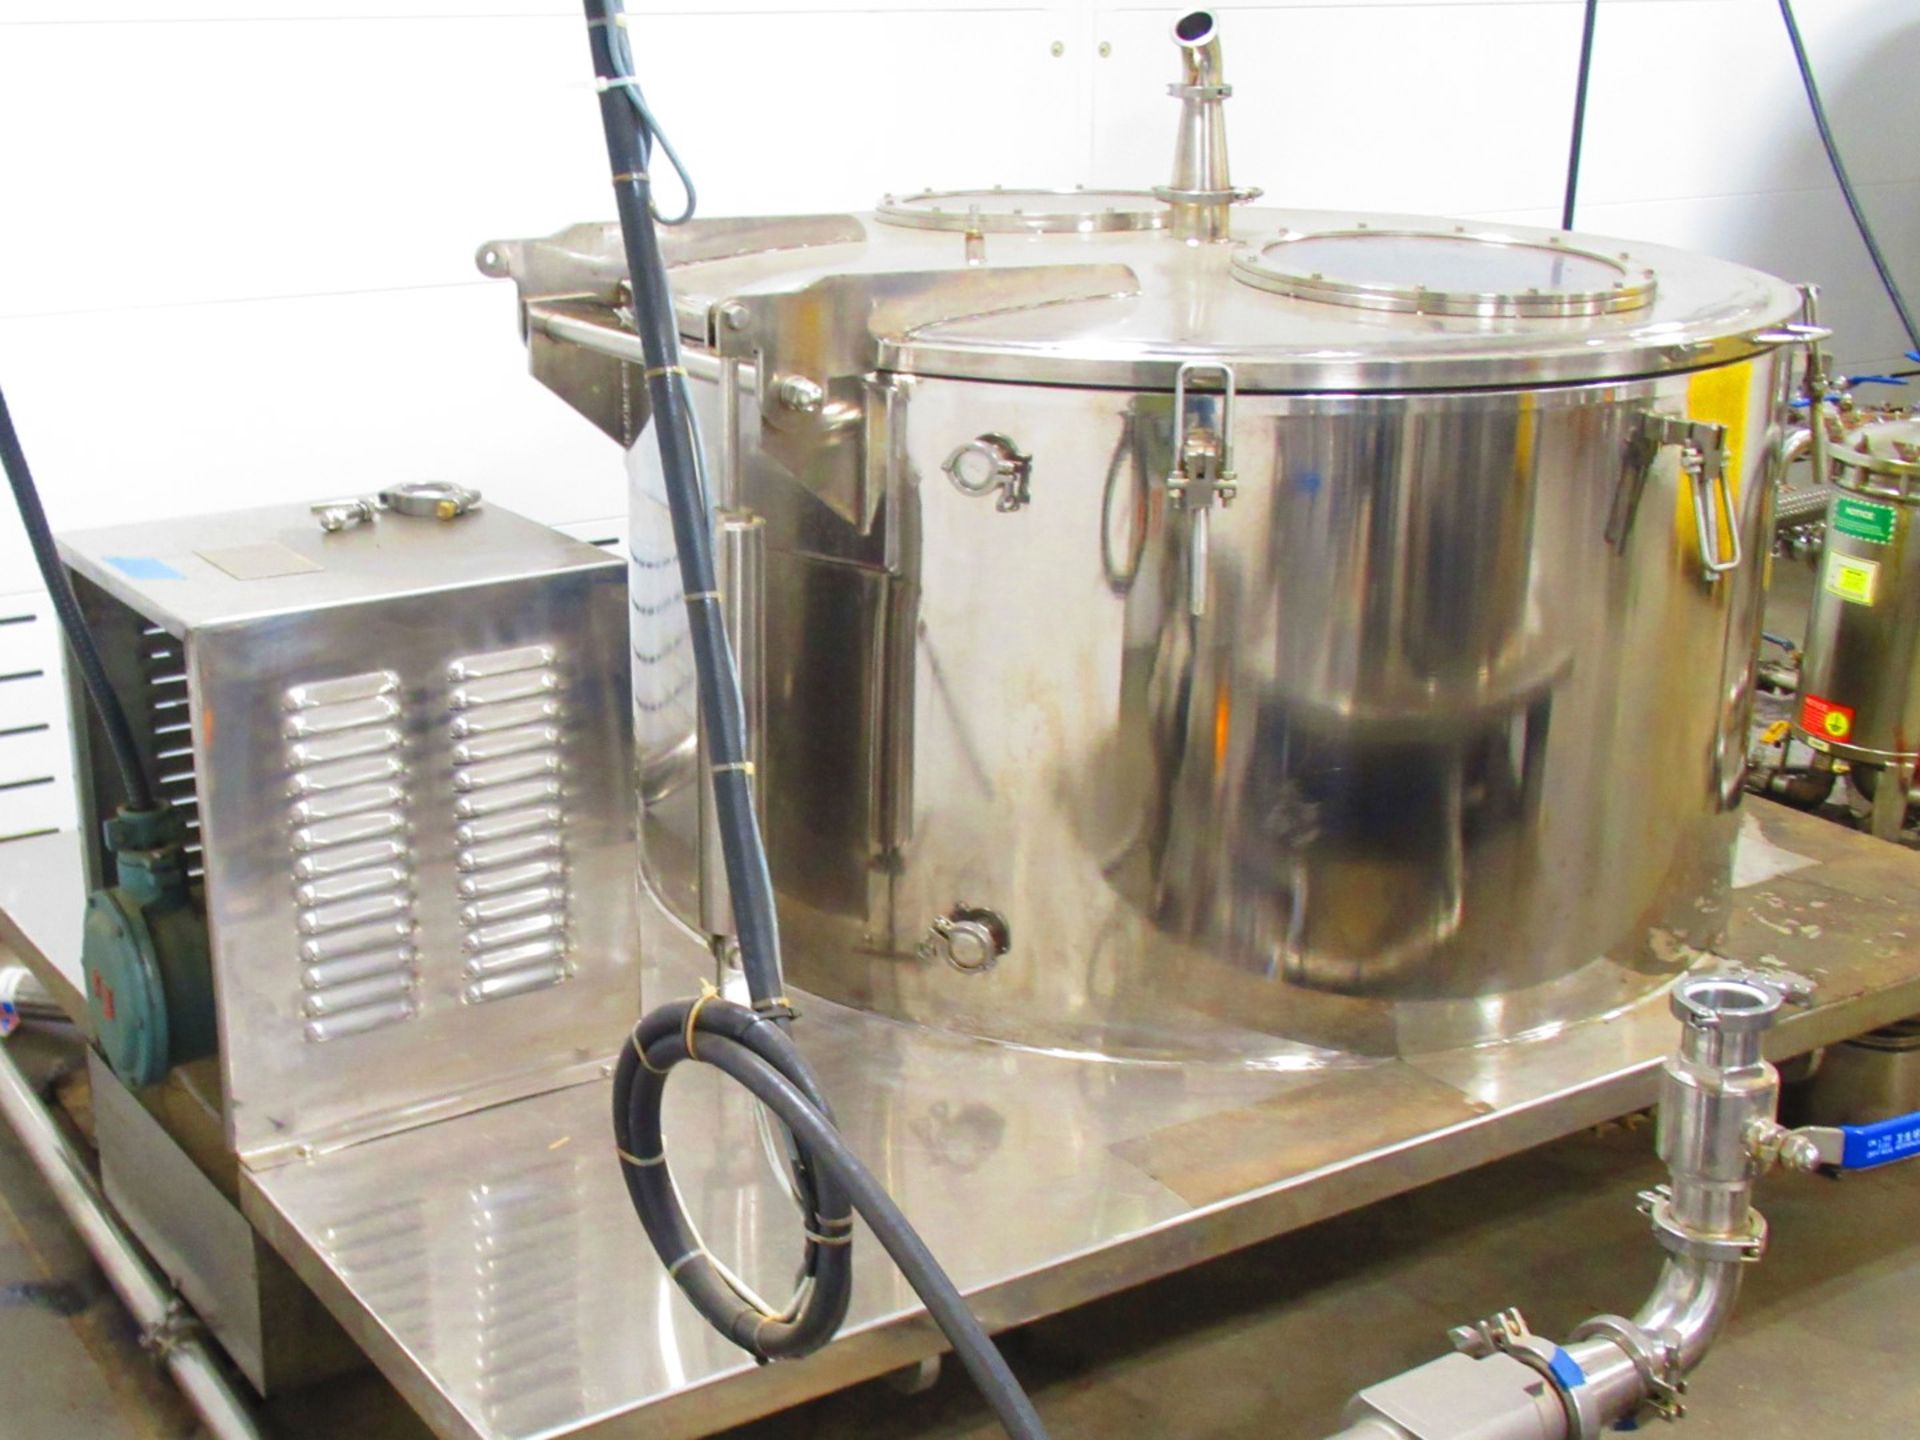 Manual Top Discharge Centrifuge - Image 2 of 8